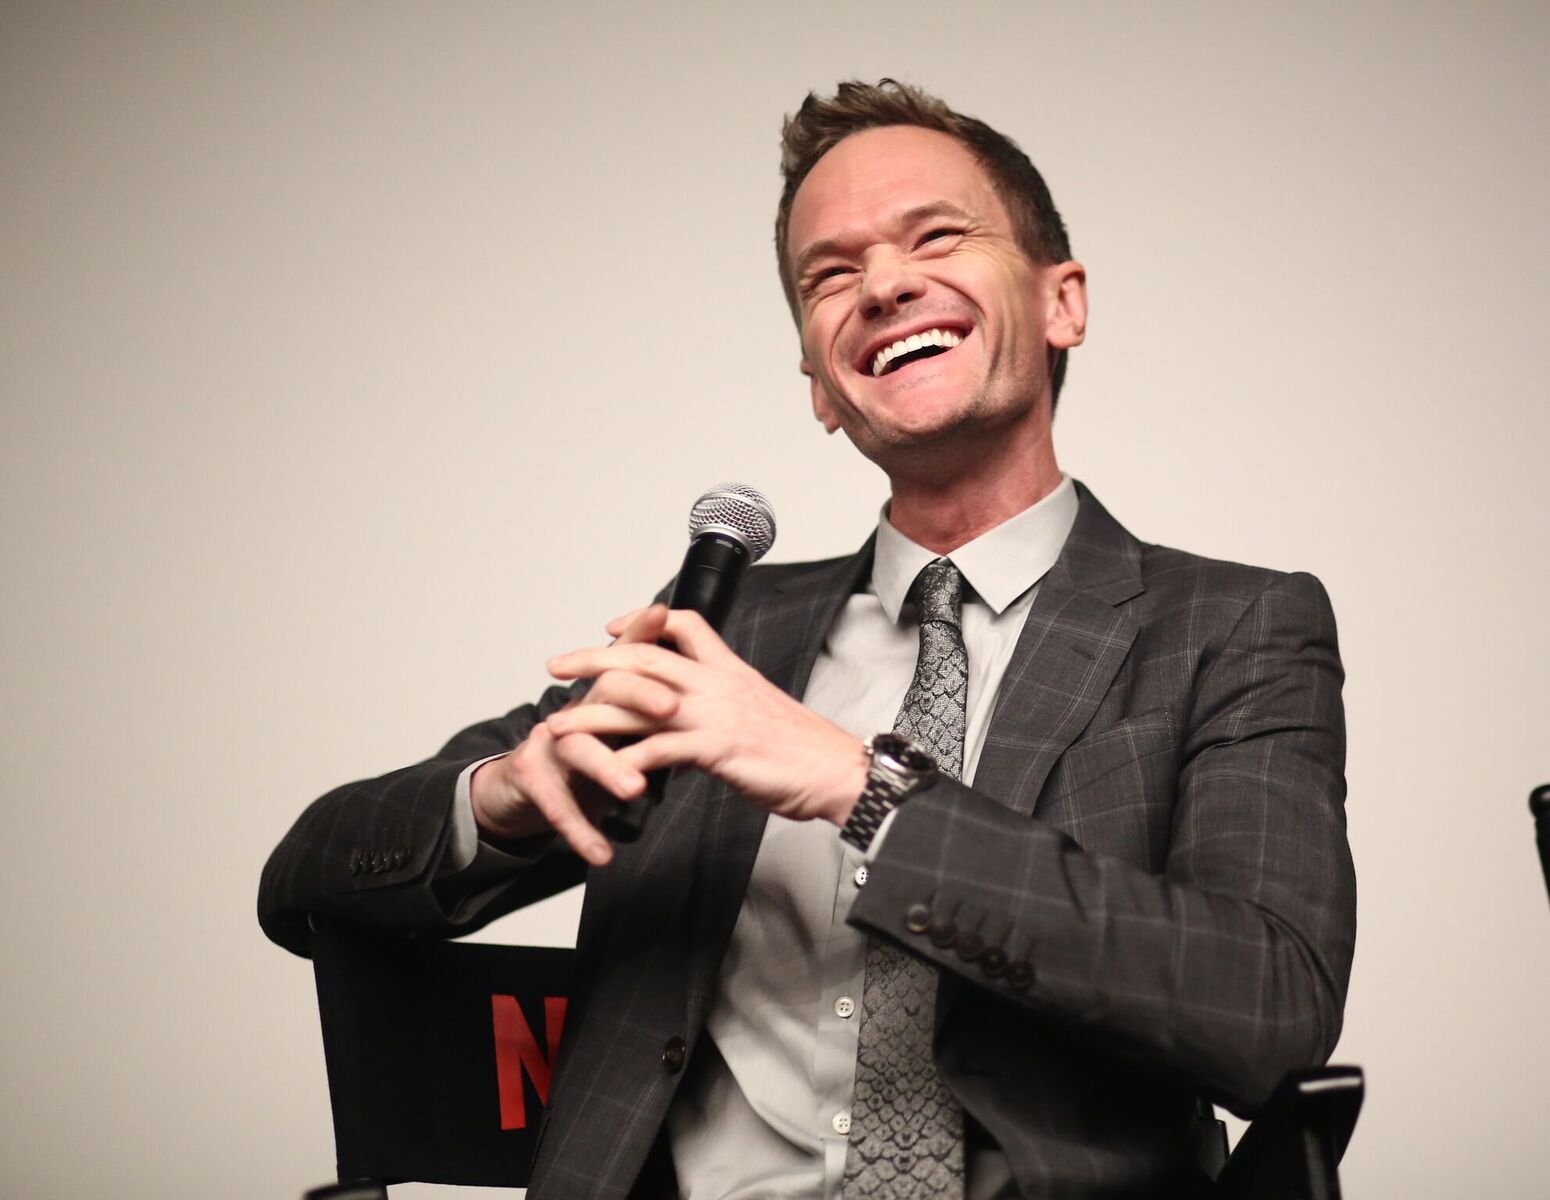 Neil Patrick Harris at Netflix's "A Series of Unfortunate Events" Red Carpet and Reception in 2019| Photo: Getty Images